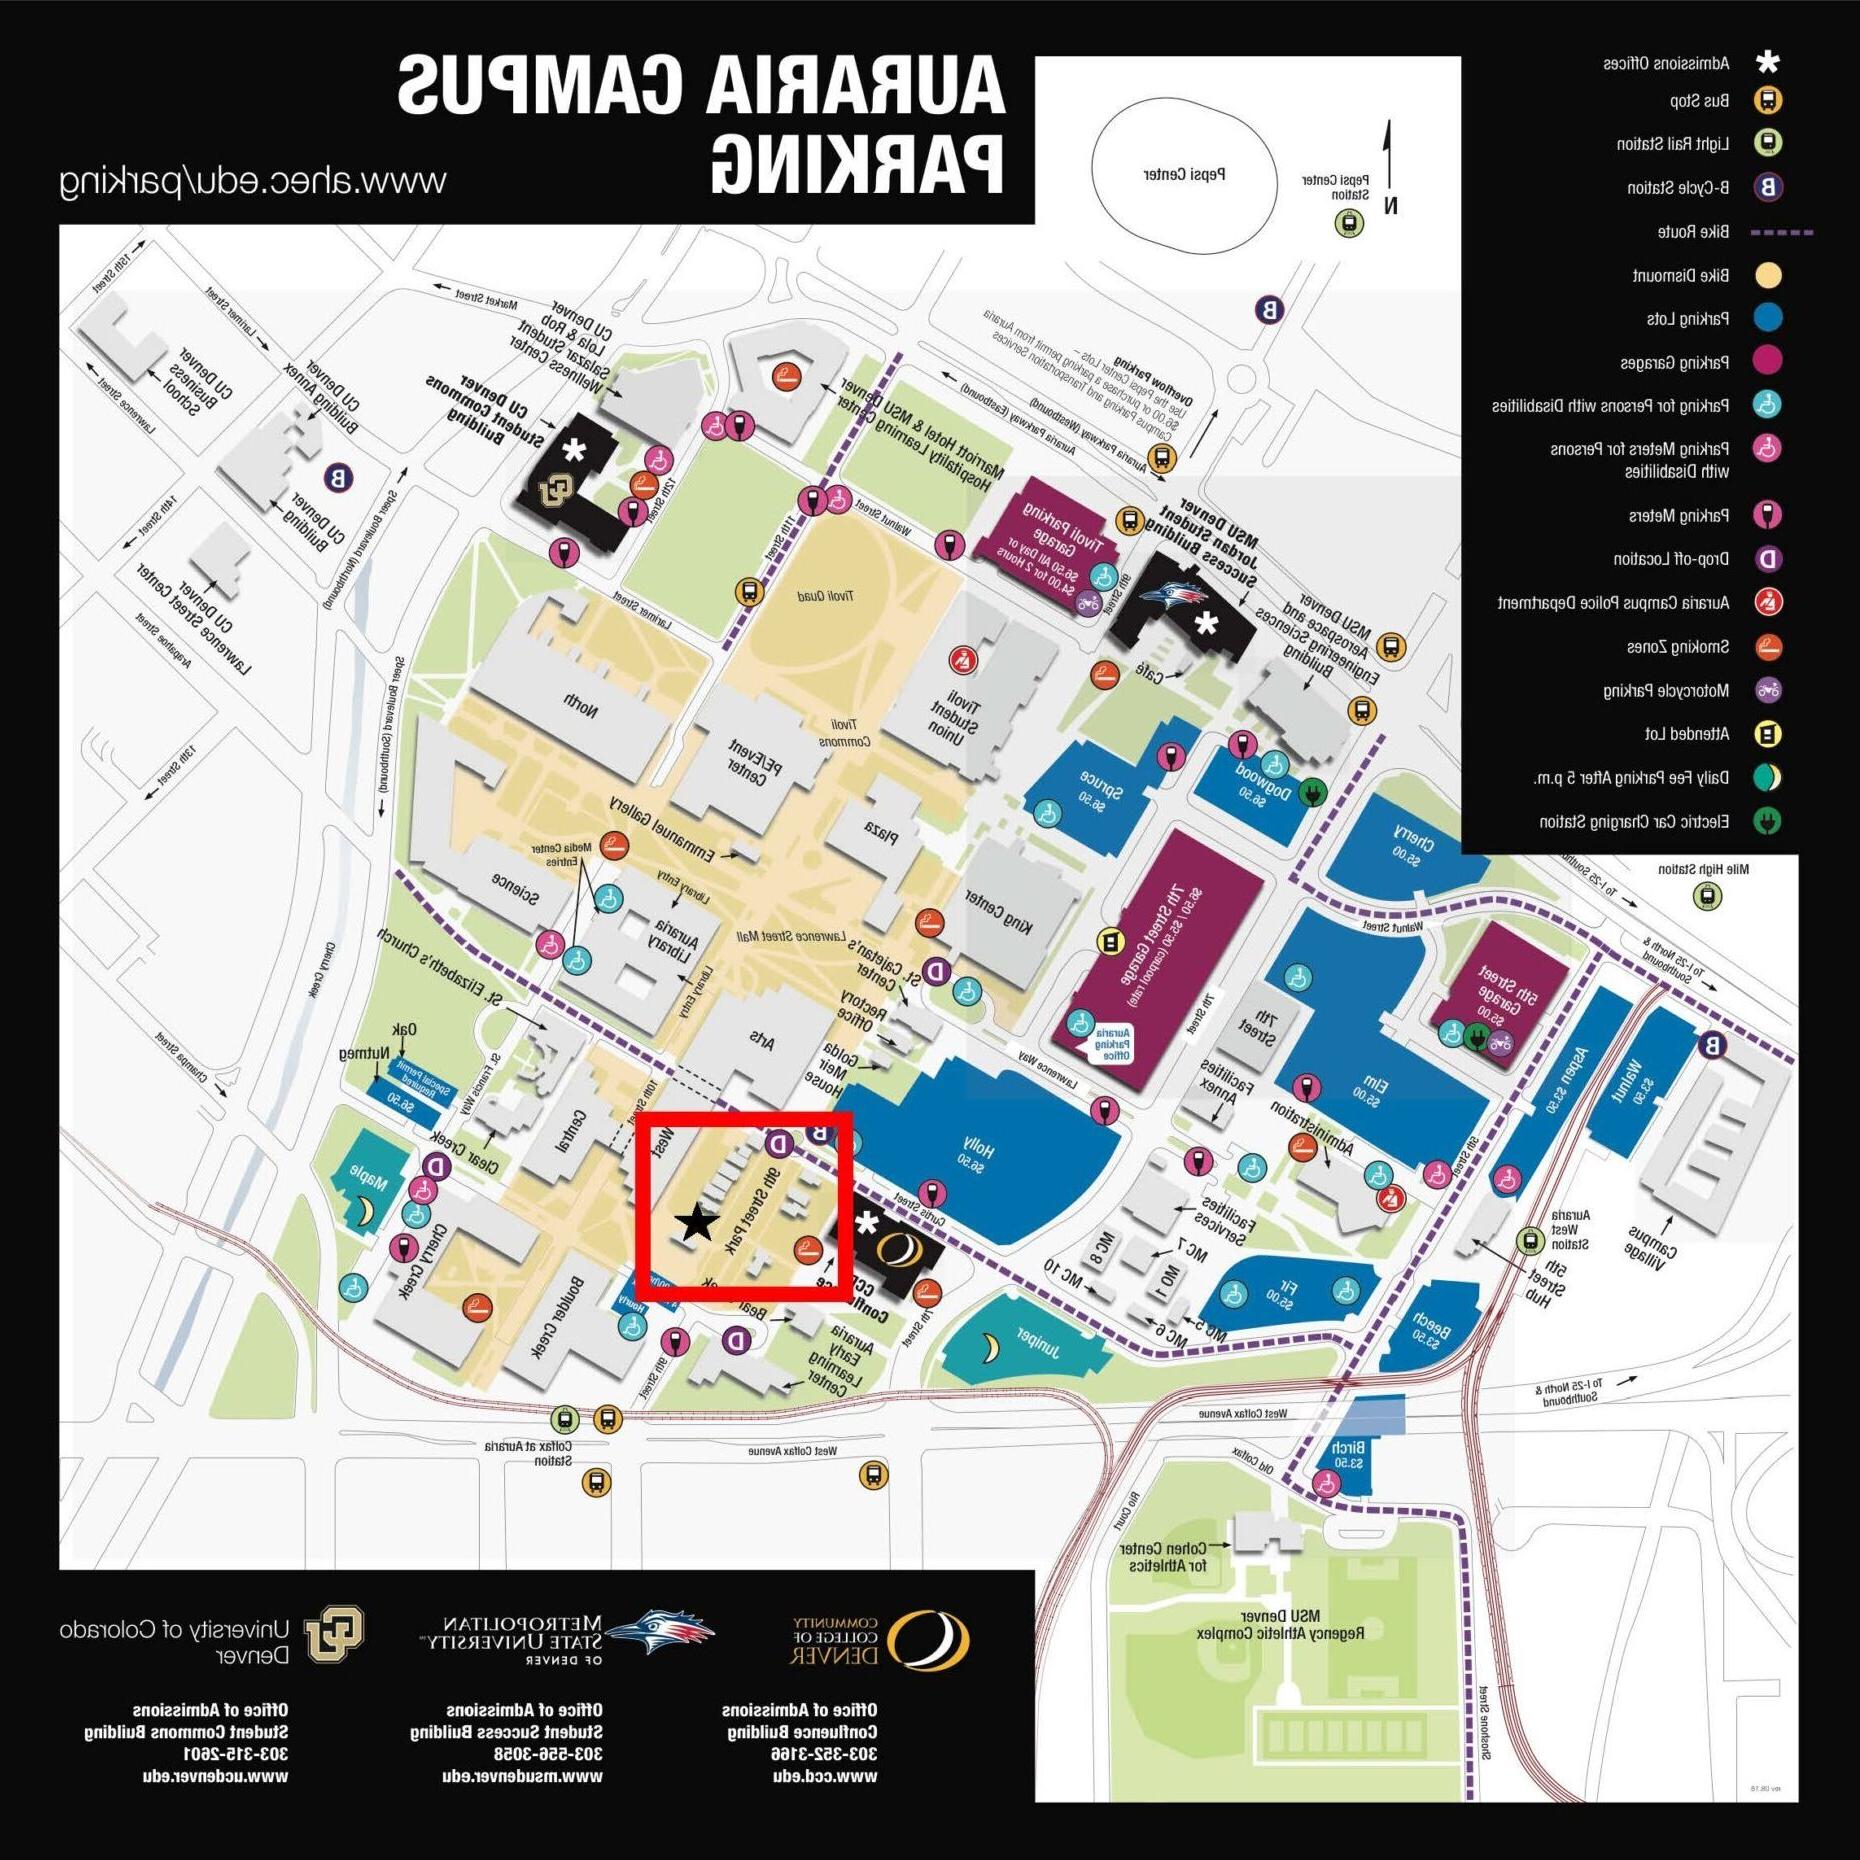 A campus map highlighting CIL's new location on 9th St